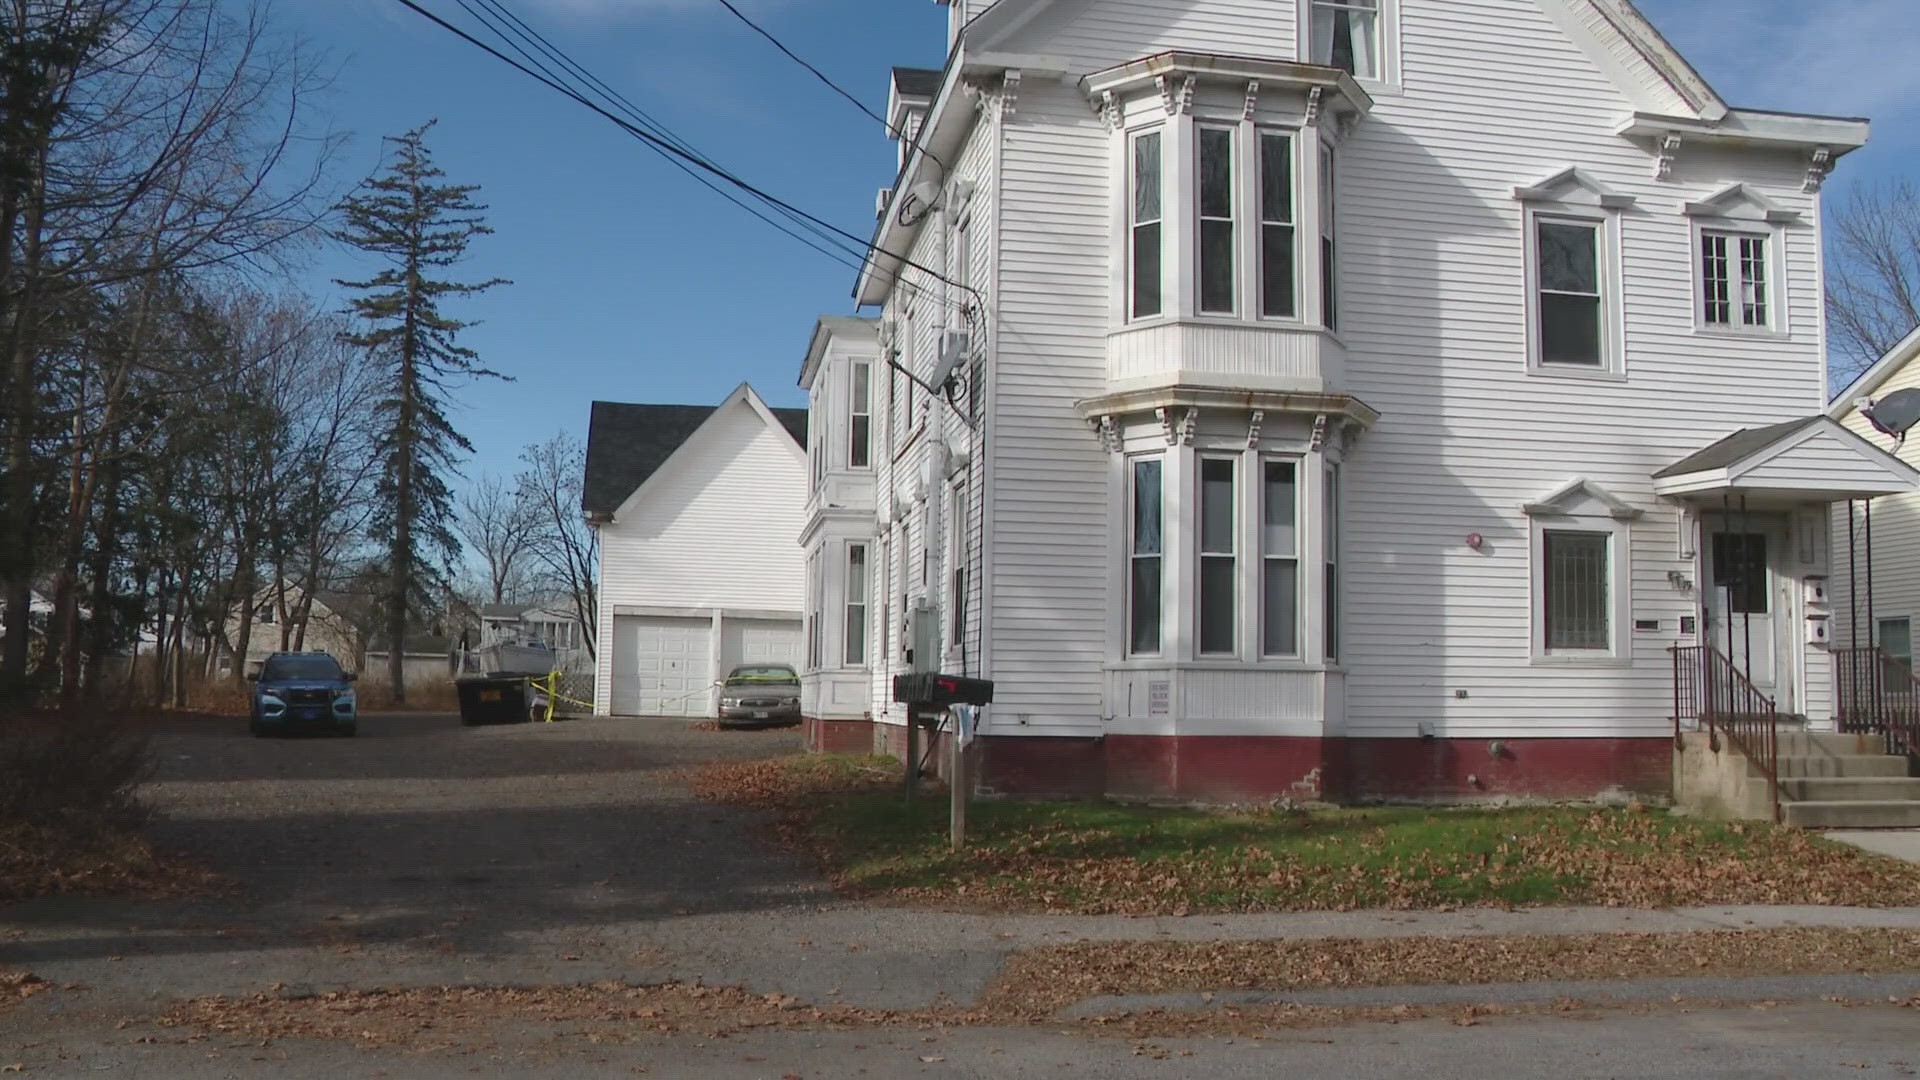 Officials found a man dead in an apartment and deemed the death suspicious, Maine Department of Public Safety spokesperson Shannon Moss said in a release.